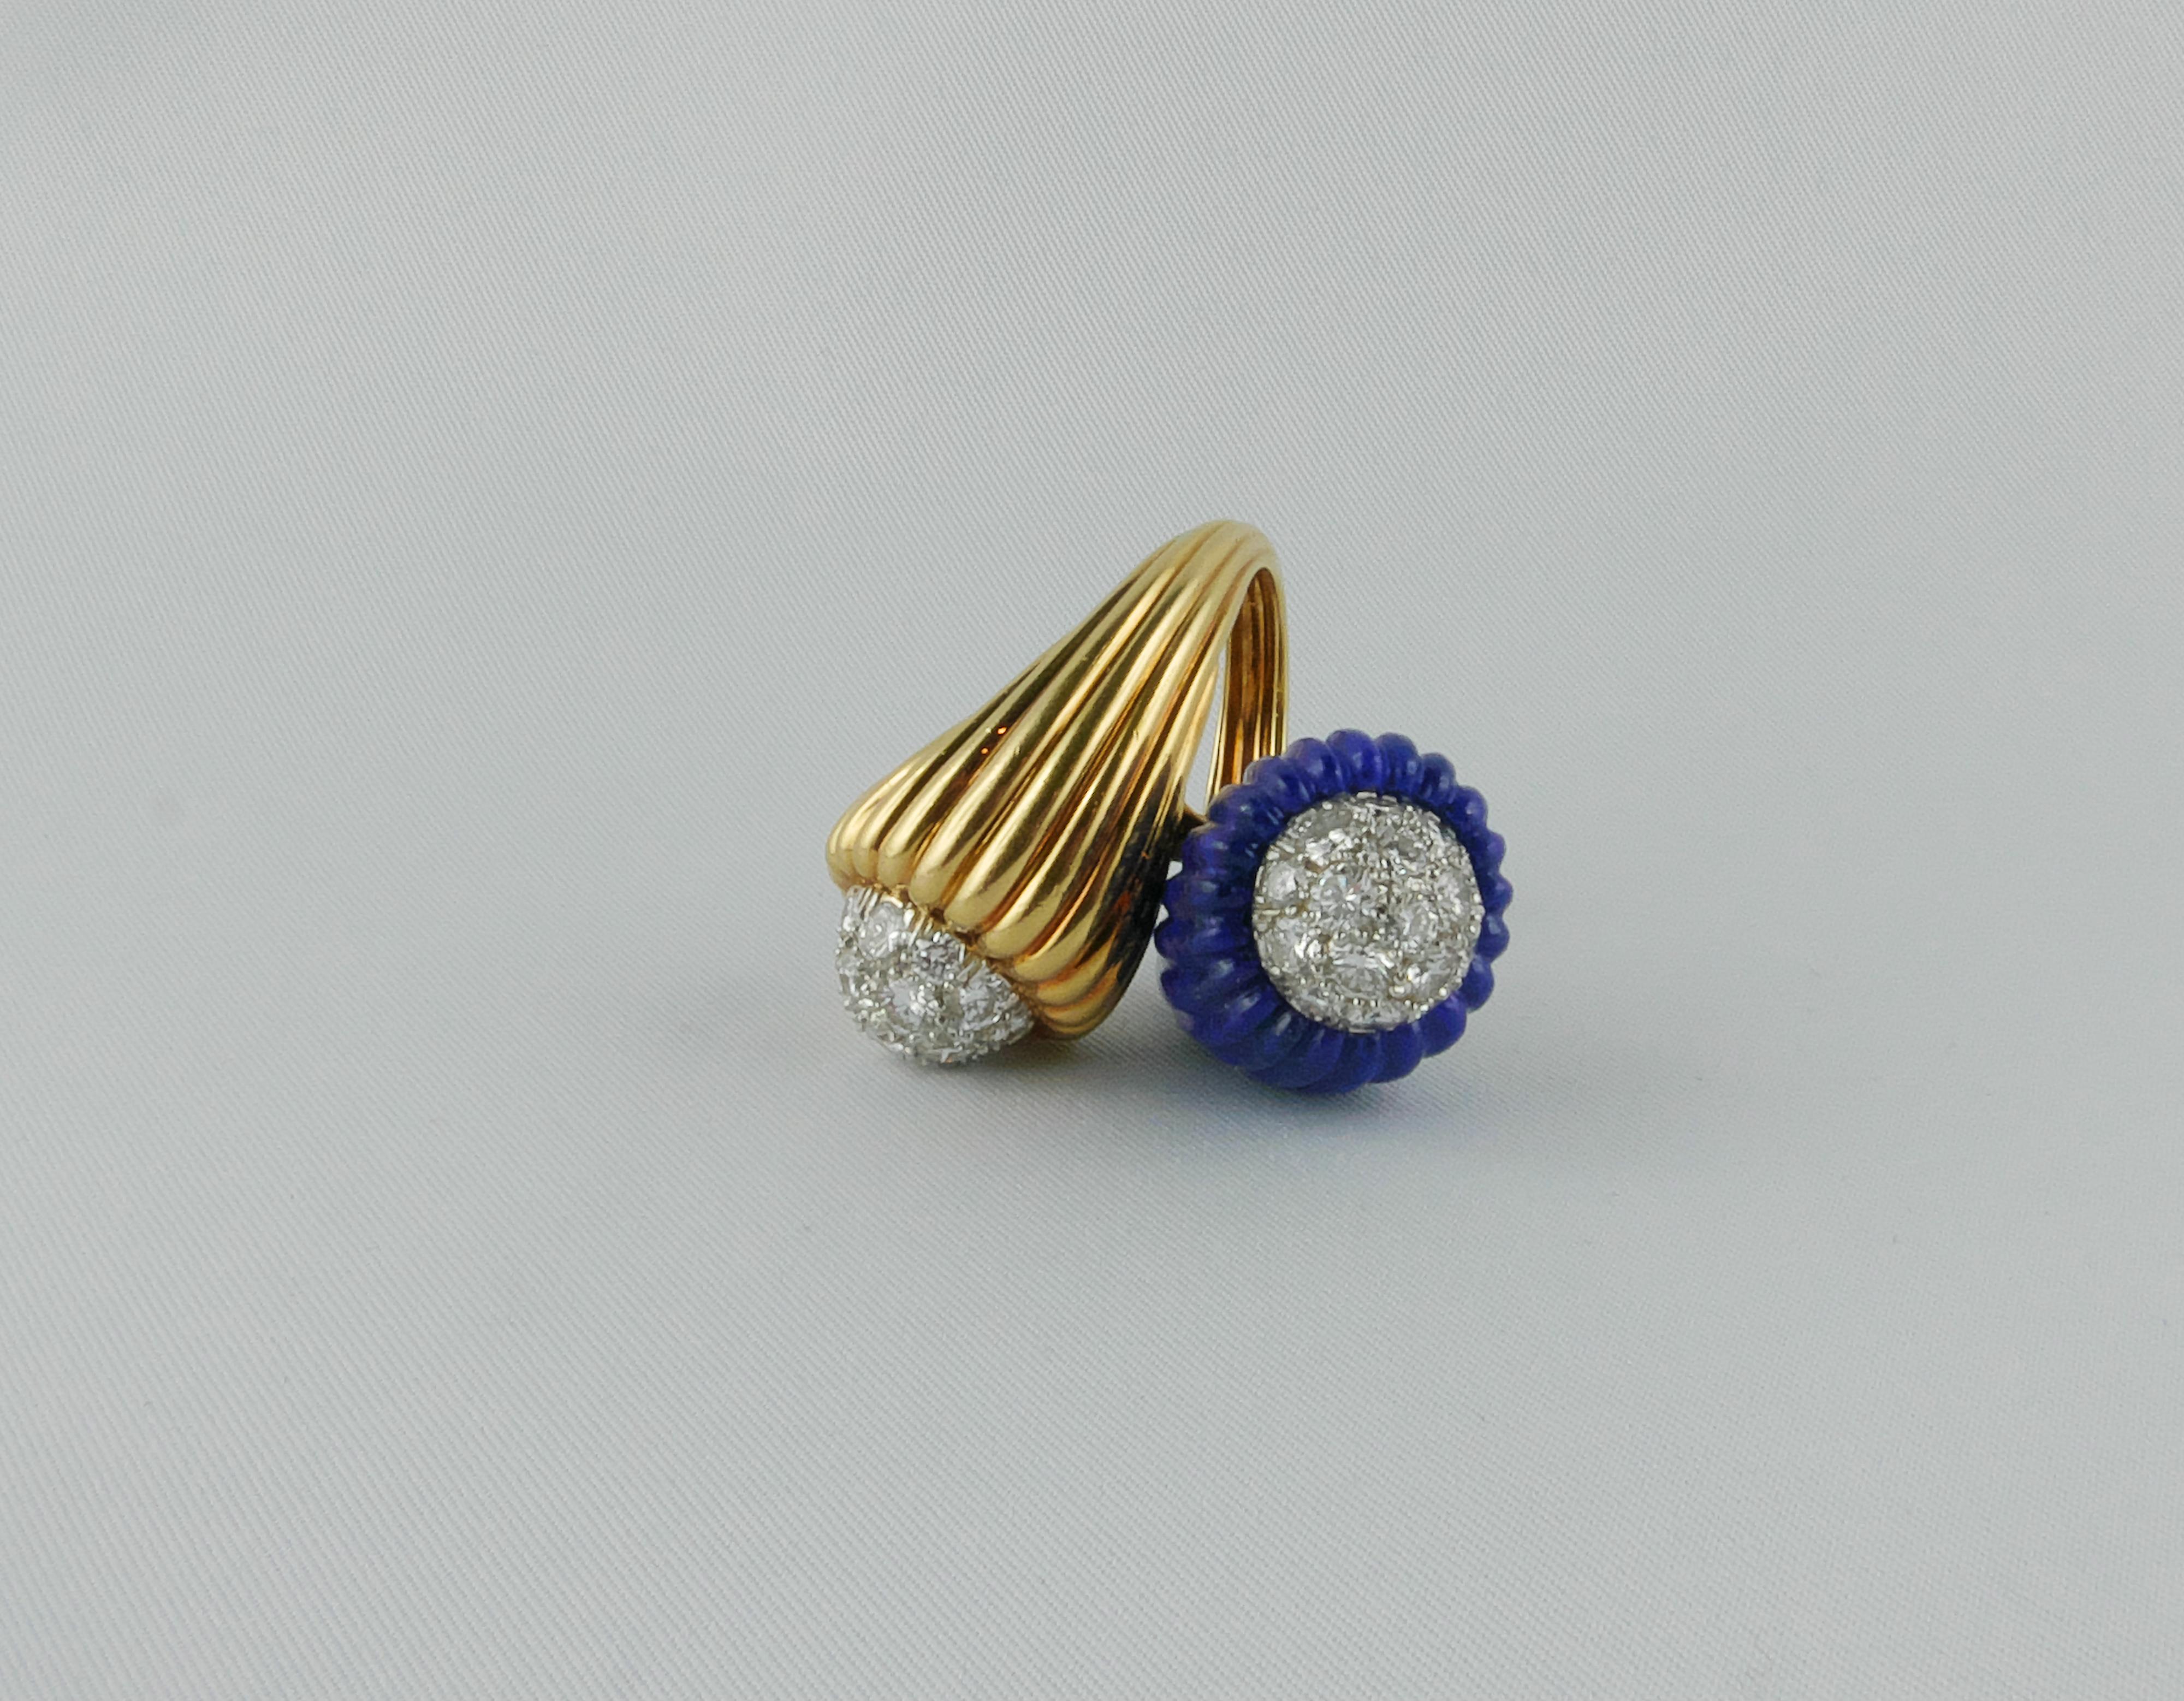 Distintive and imposing  Ring exquisitely crafted in the 1970’s
The finely scalloped Lapislazuli creates a contrarié mounting with the scalloped Gold end, both are accented by round cut Diamonds, set in Platinum in a domed motif, to add superb